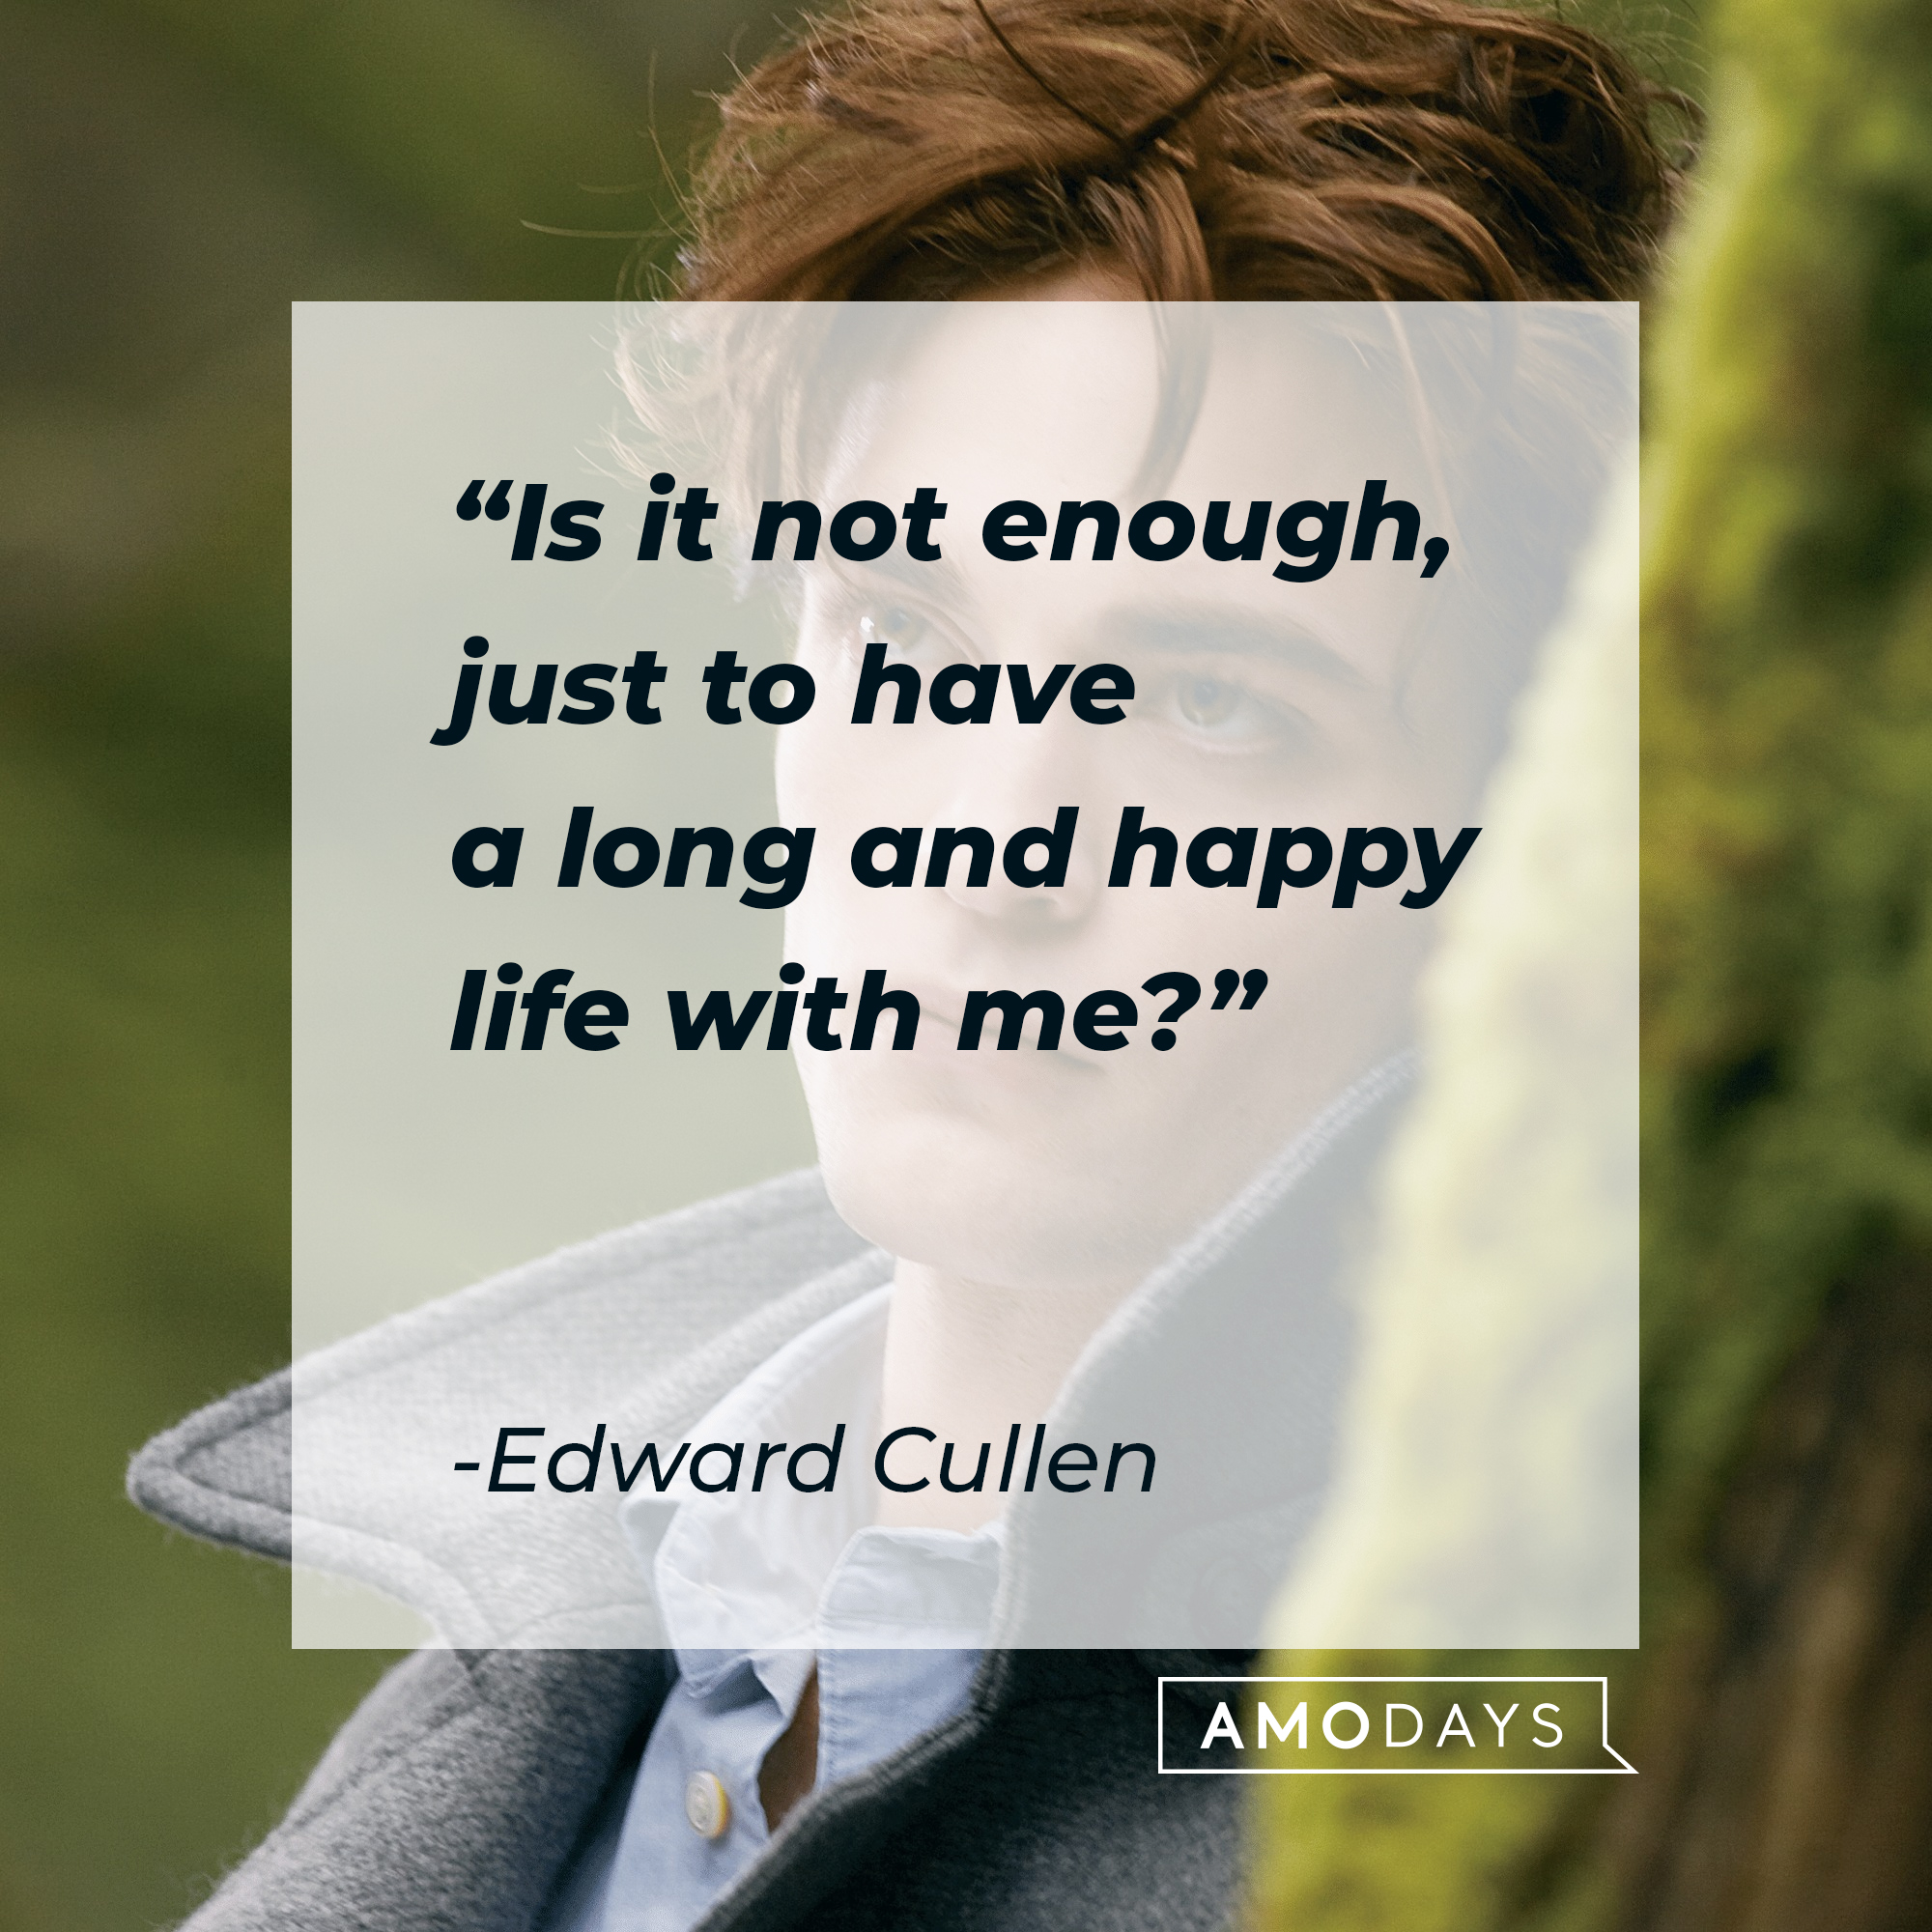 An image of Edward Cullen with his quote: “Is it not enough, just to have a long and happy life with me?” | Source: Facebook.com/twilight